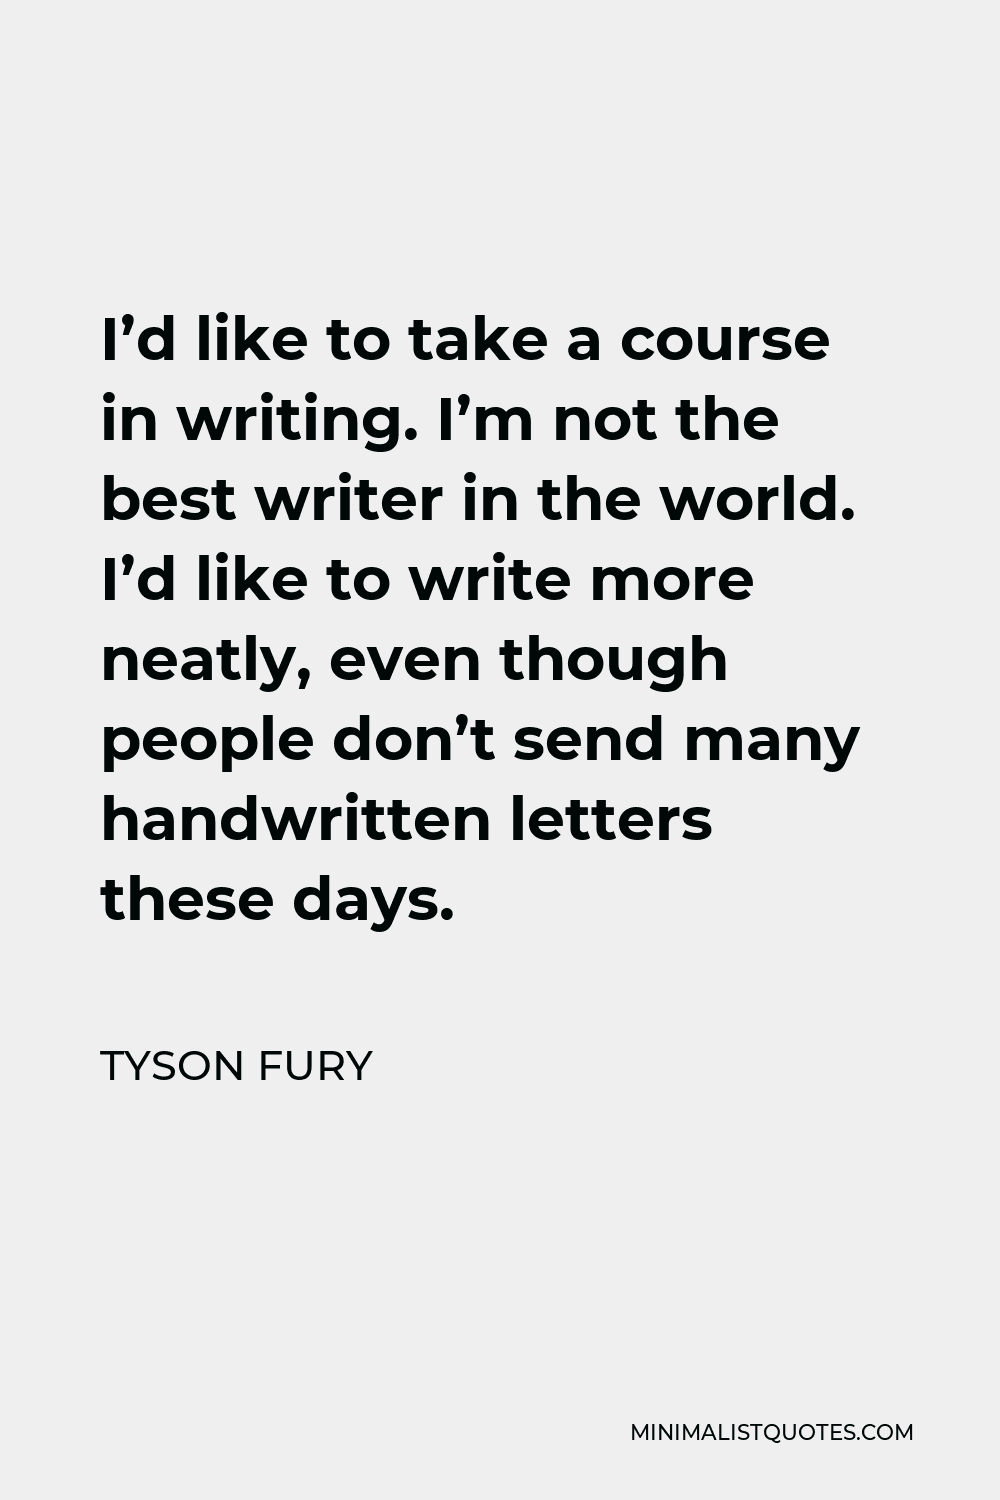 Tyson Fury Quote - I’d like to take a course in writing. I’m not the best writer in the world. I’d like to write more neatly, even though people don’t send many handwritten letters these days.